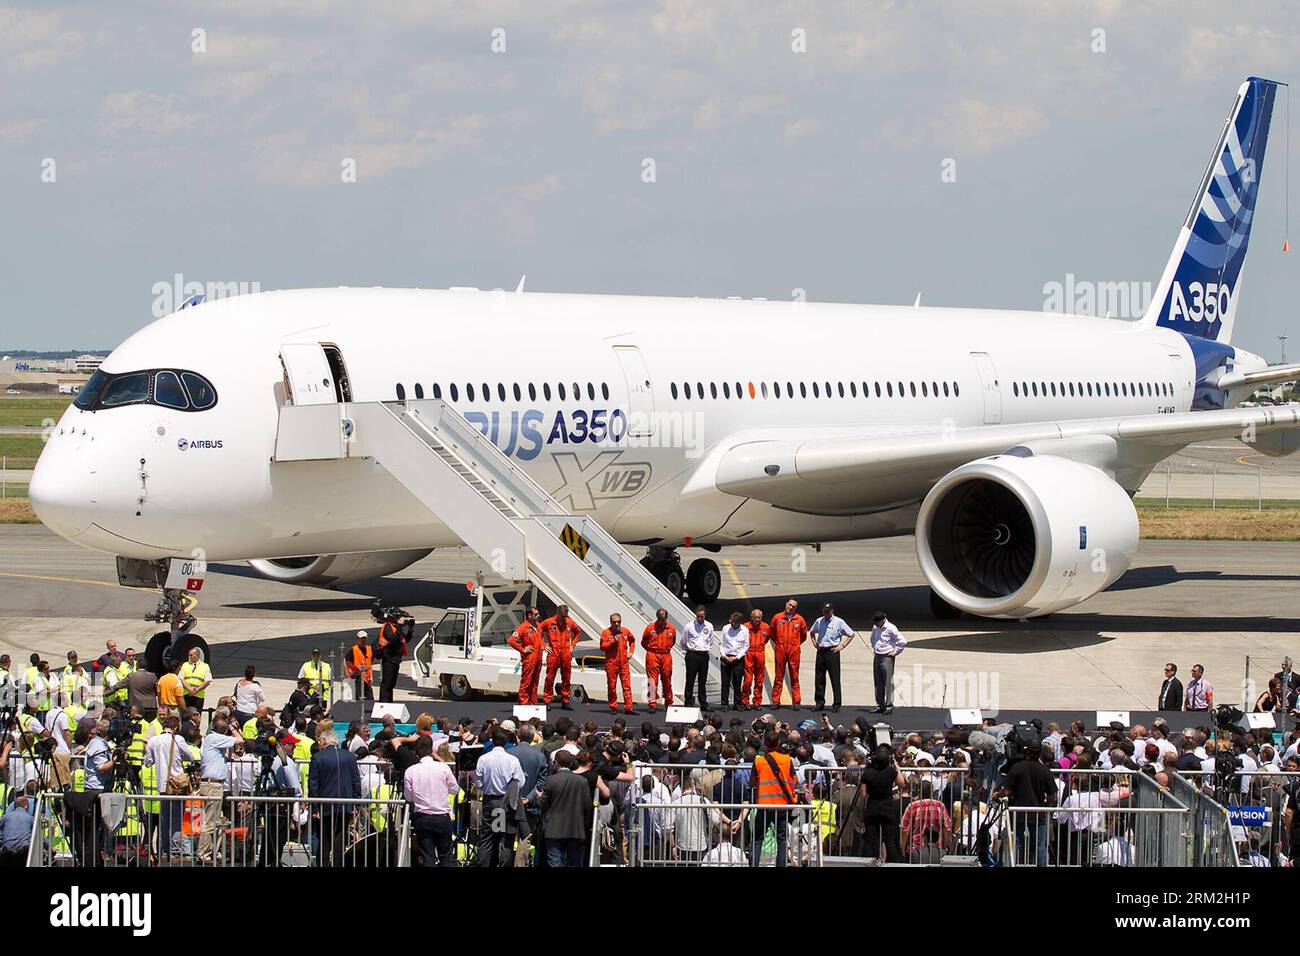 Bildnummer: 59834867  Datum: 14.06.2013  Copyright: imago/Xinhua (130614) -- TOULOUSE, June 14, 2013 (Xinhua) -- Crew members of Airbus s A350 XWB (eXtra Wide Body) plane attend a press conference after it landed at the Toulouse-Blagnac airport, southwestern France, on June 14, 2013. After its first four-hour test flight, the A350 XWB plane landed safely in southern France on Friday. (Xinhua/Chen Cheng) FRANCE-AIRBUS-A350 XWB-TEST FLIGHT PUBLICATIONxNOTxINxCHN Wirtschaft Verkehr Luftfahrt Testflug Airbus A 350 premiumd xbs x0x 2013 quer      59834867 Date 14 06 2013 Copyright Imago XINHUA  Tou Stock Photo